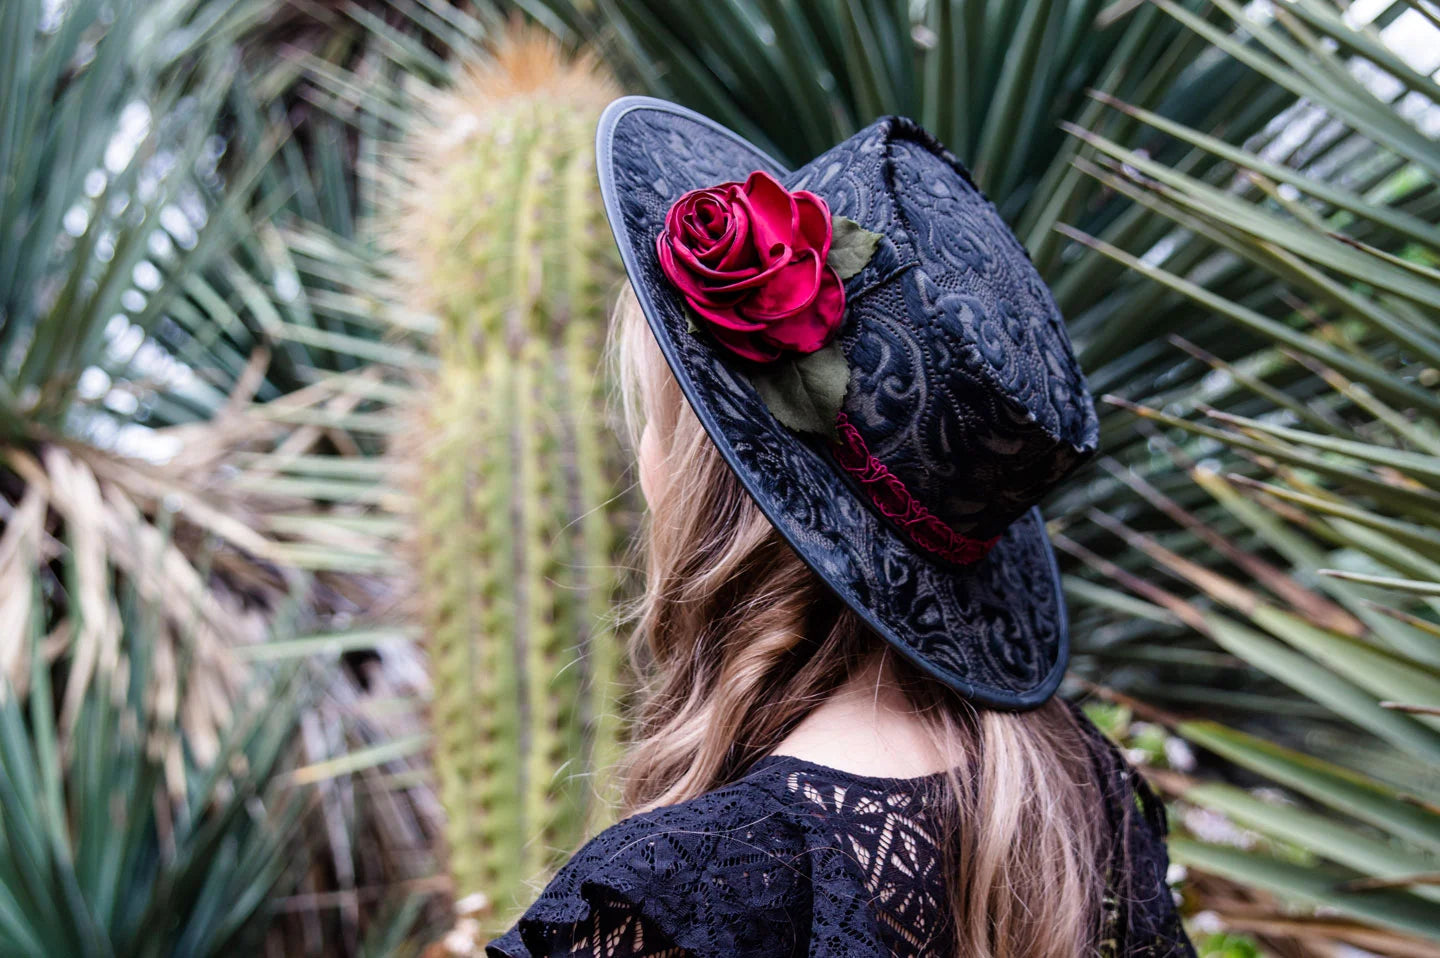 Woman in cactus garden wearing the Ruby womens couture hat by American Hat Makers